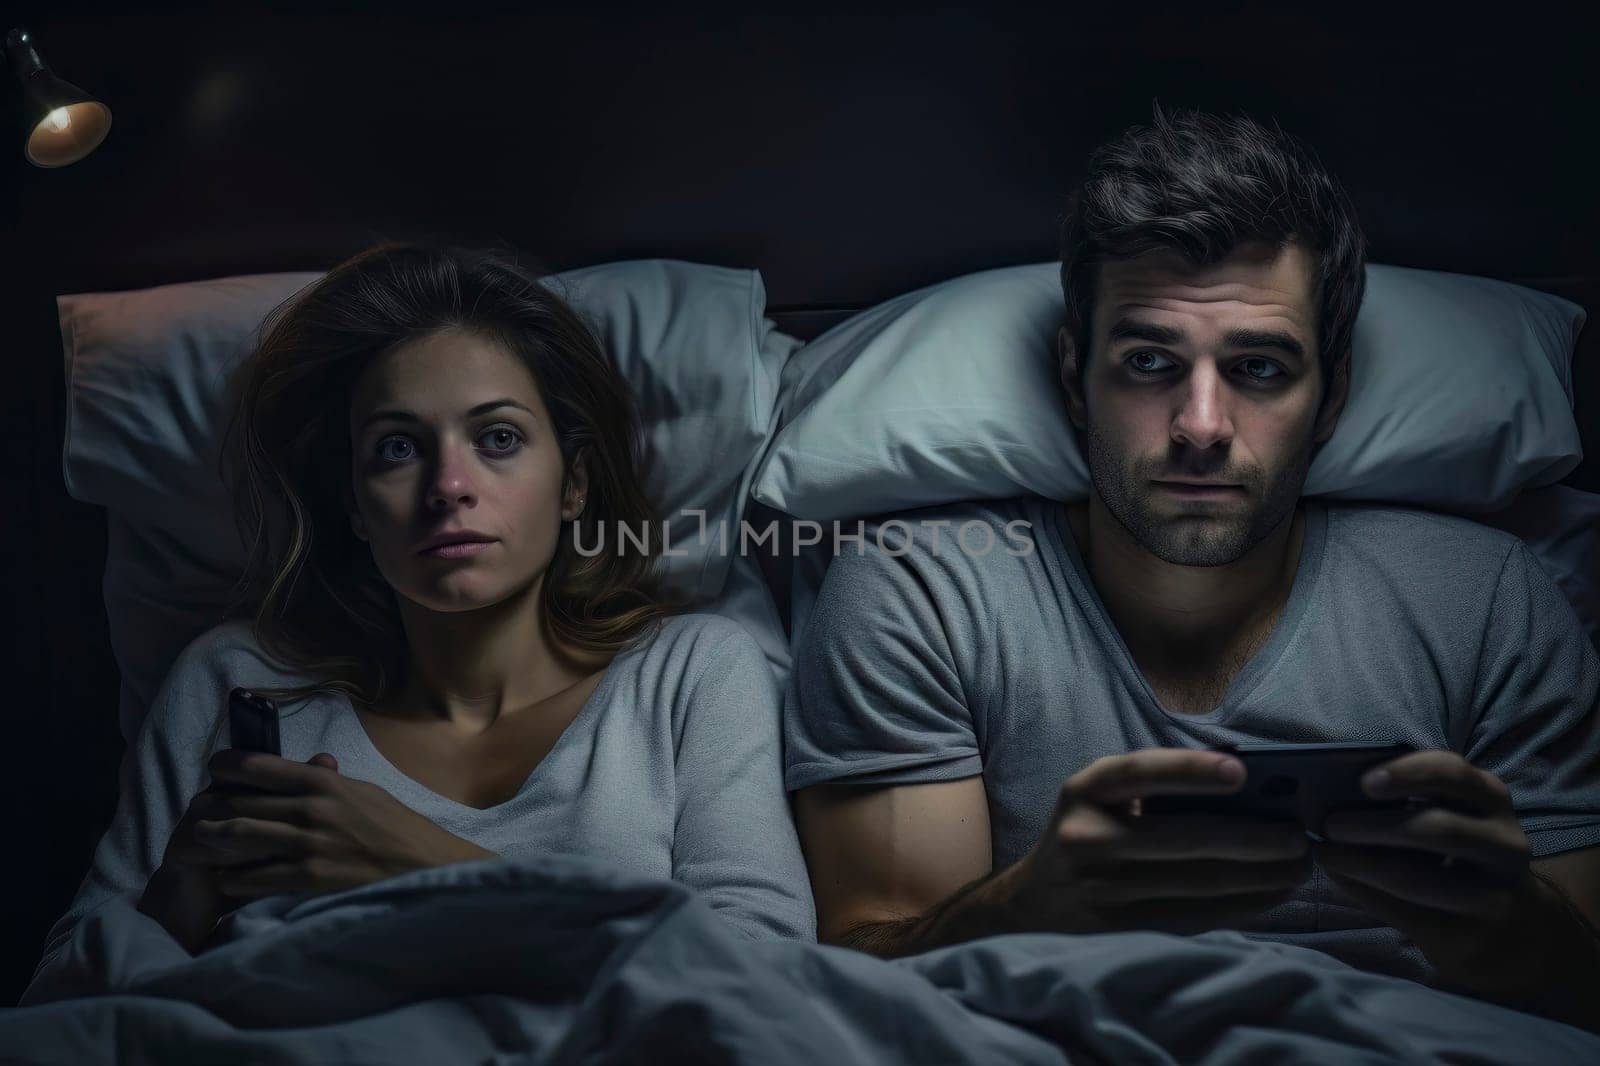 Couple in Bed, Absorbed in Smartphones by pippocarlot